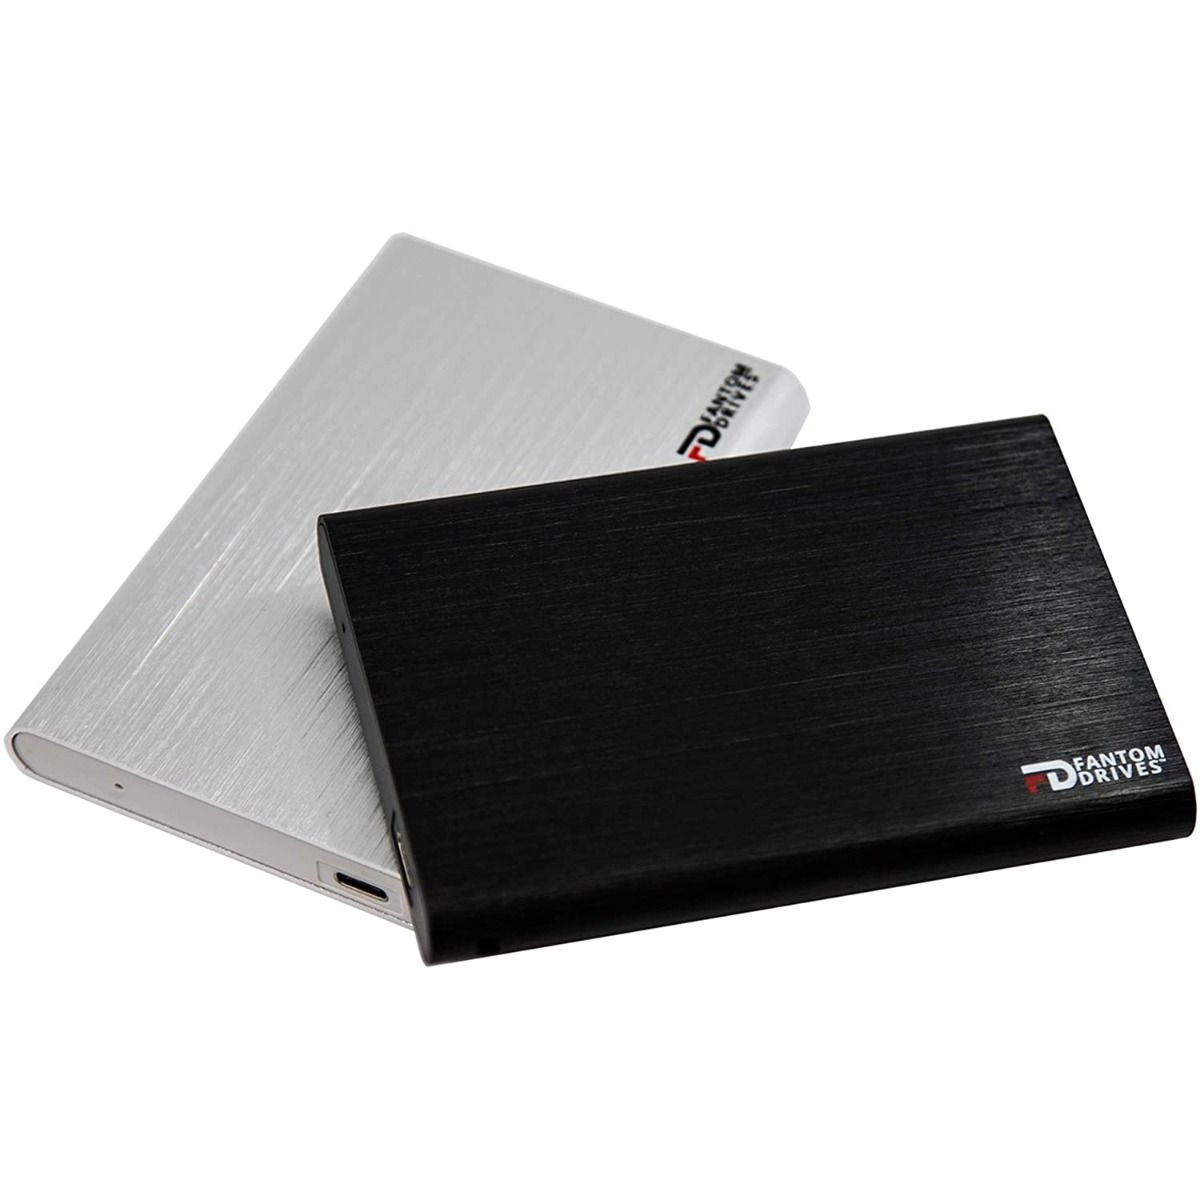 500GO 1TO Disque dur externe 2,5 HDD USB3.0 Portable Gaming